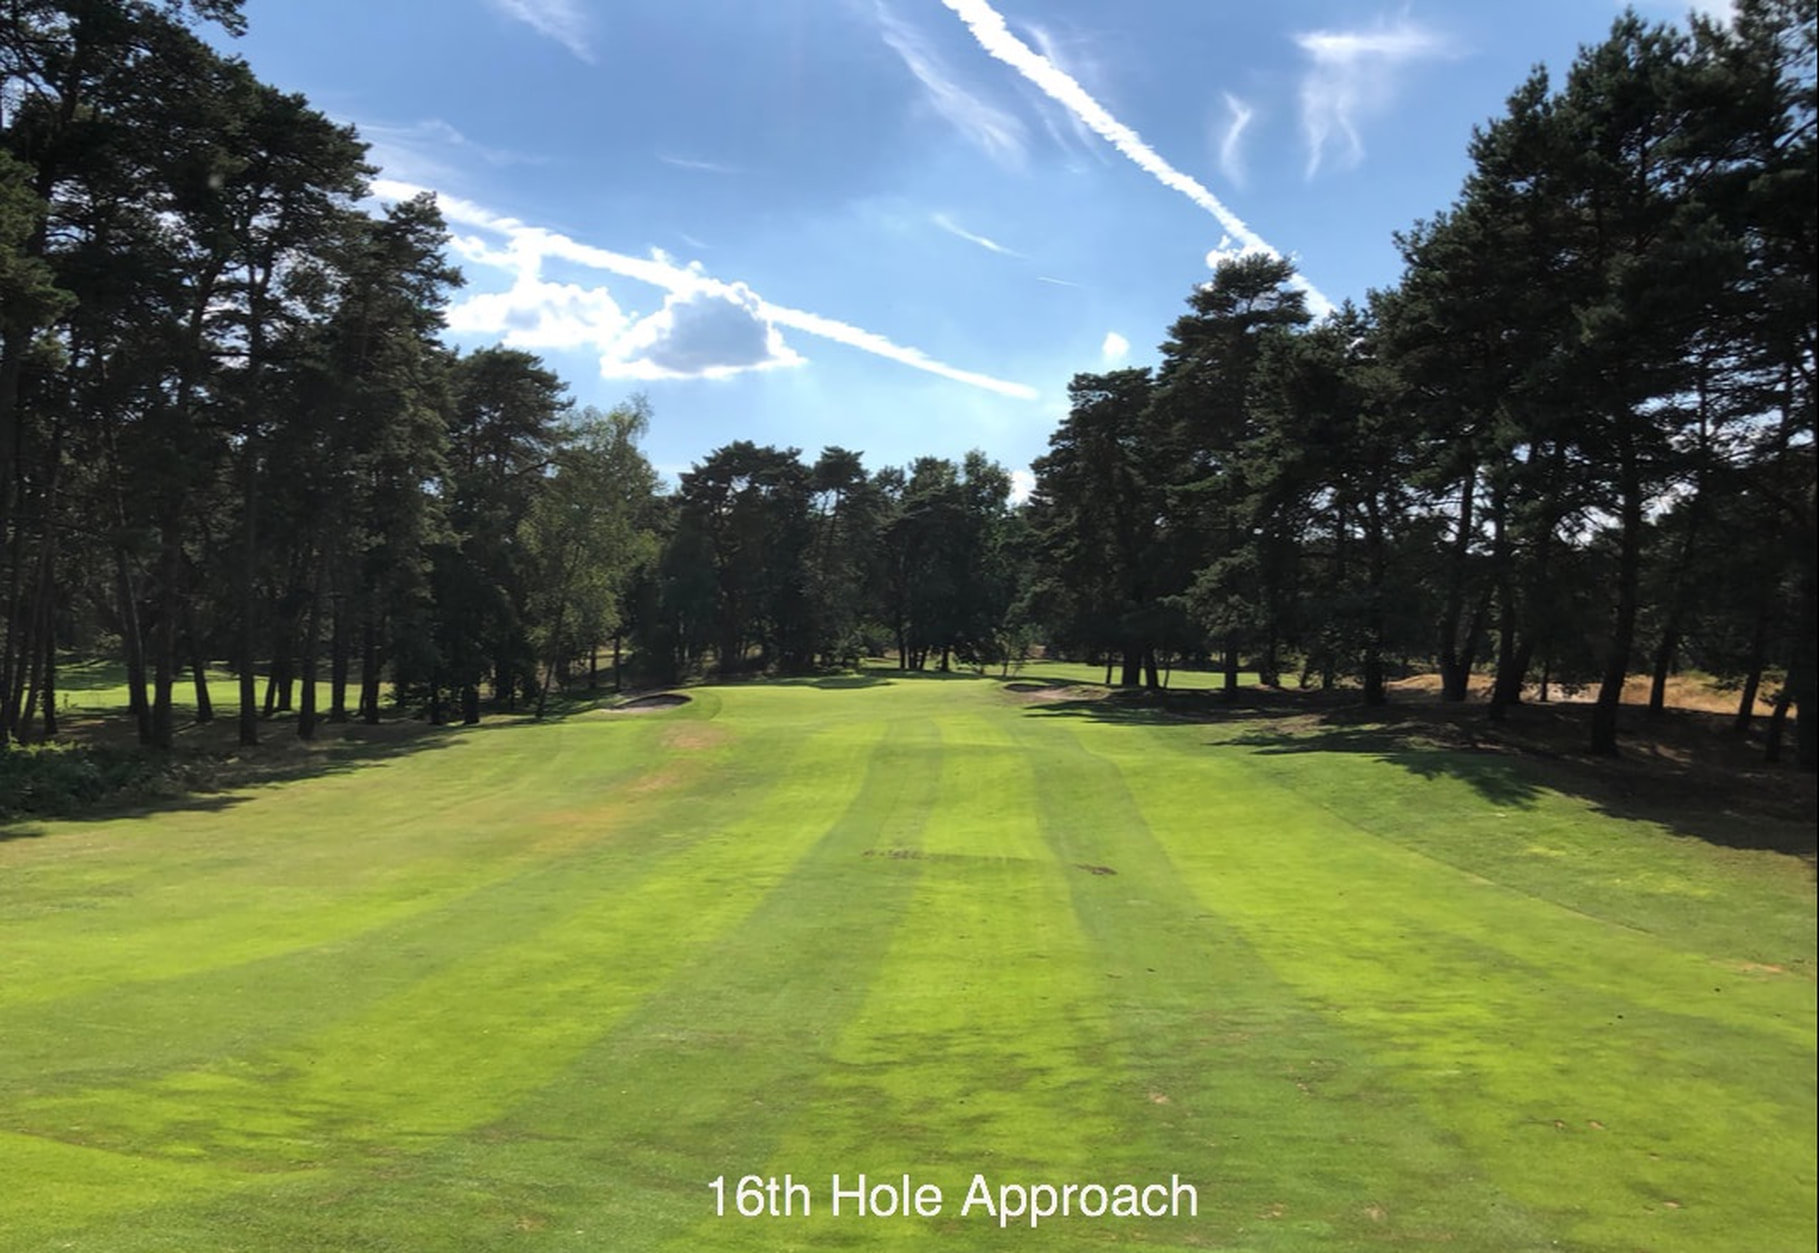 Golf de Fontainebleau, France - Peaceful Golf - Global Golfer and Guide